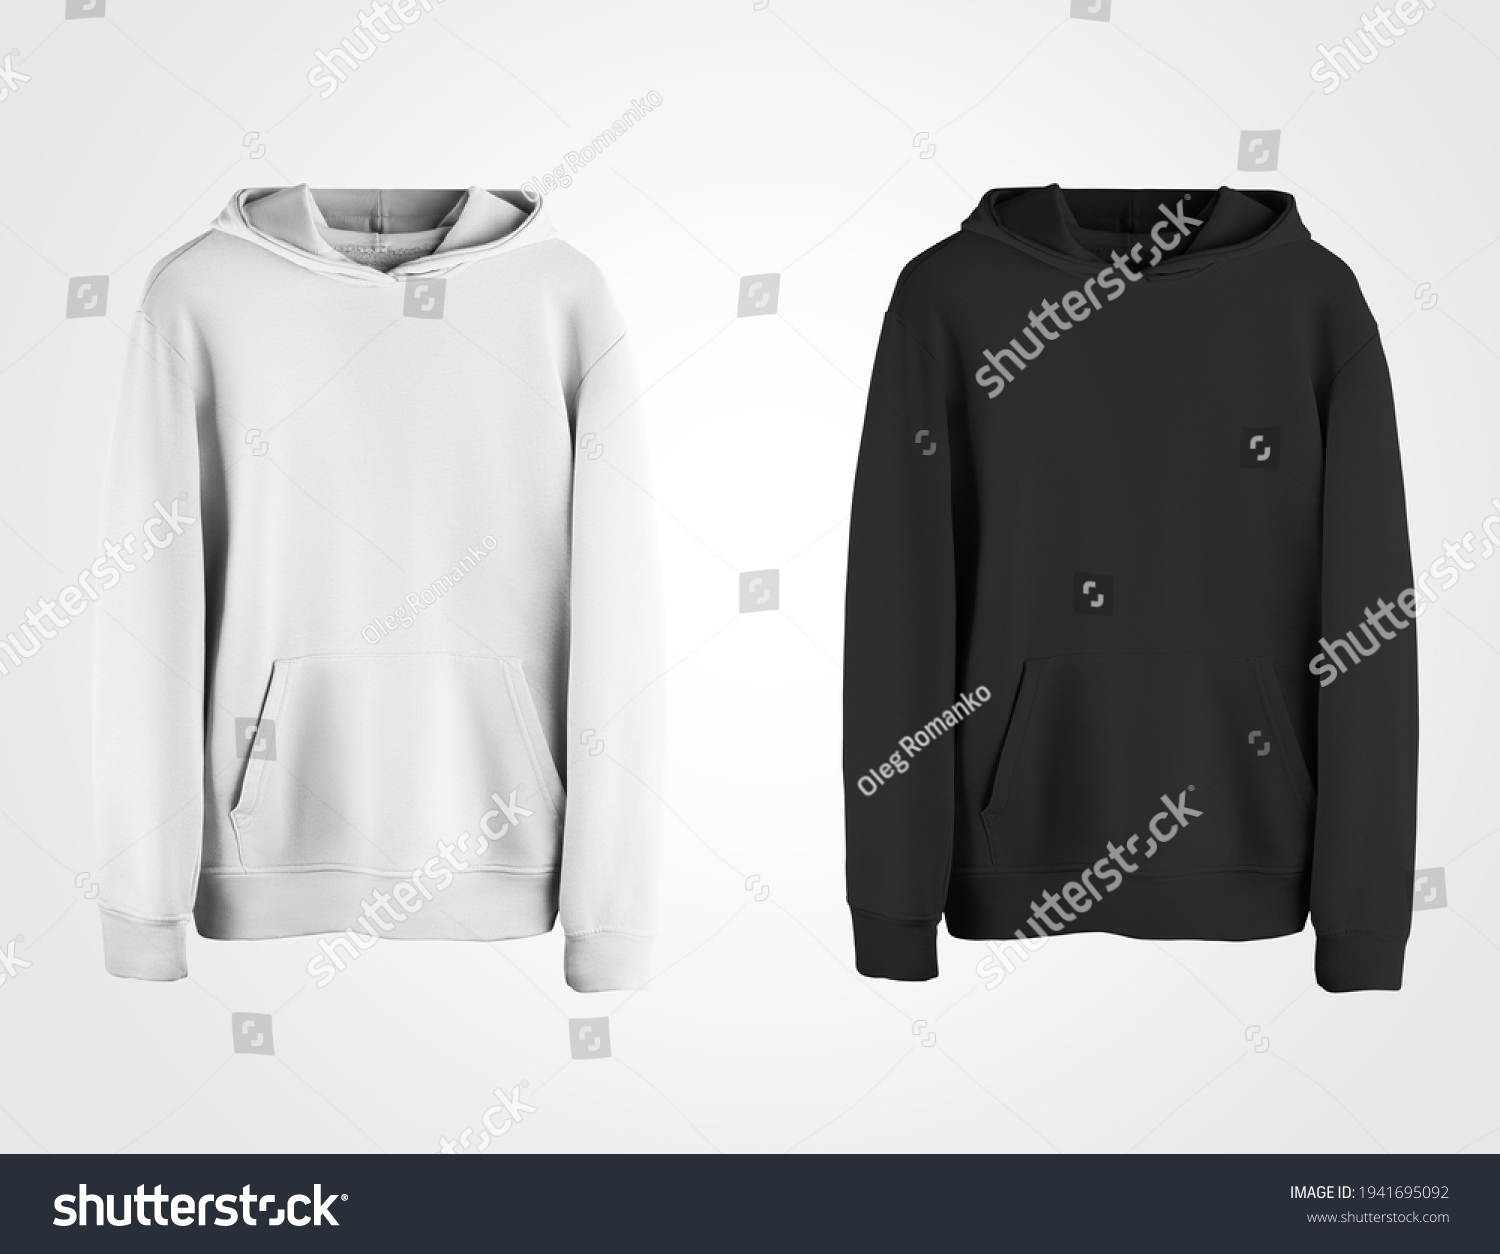 Blank white and black hoodie mockup, for presentation of design, pattern, print, front view. Template sweatshirt with a hood isolated on background. Branded men's pullover with pockets, cuffs #1941695092